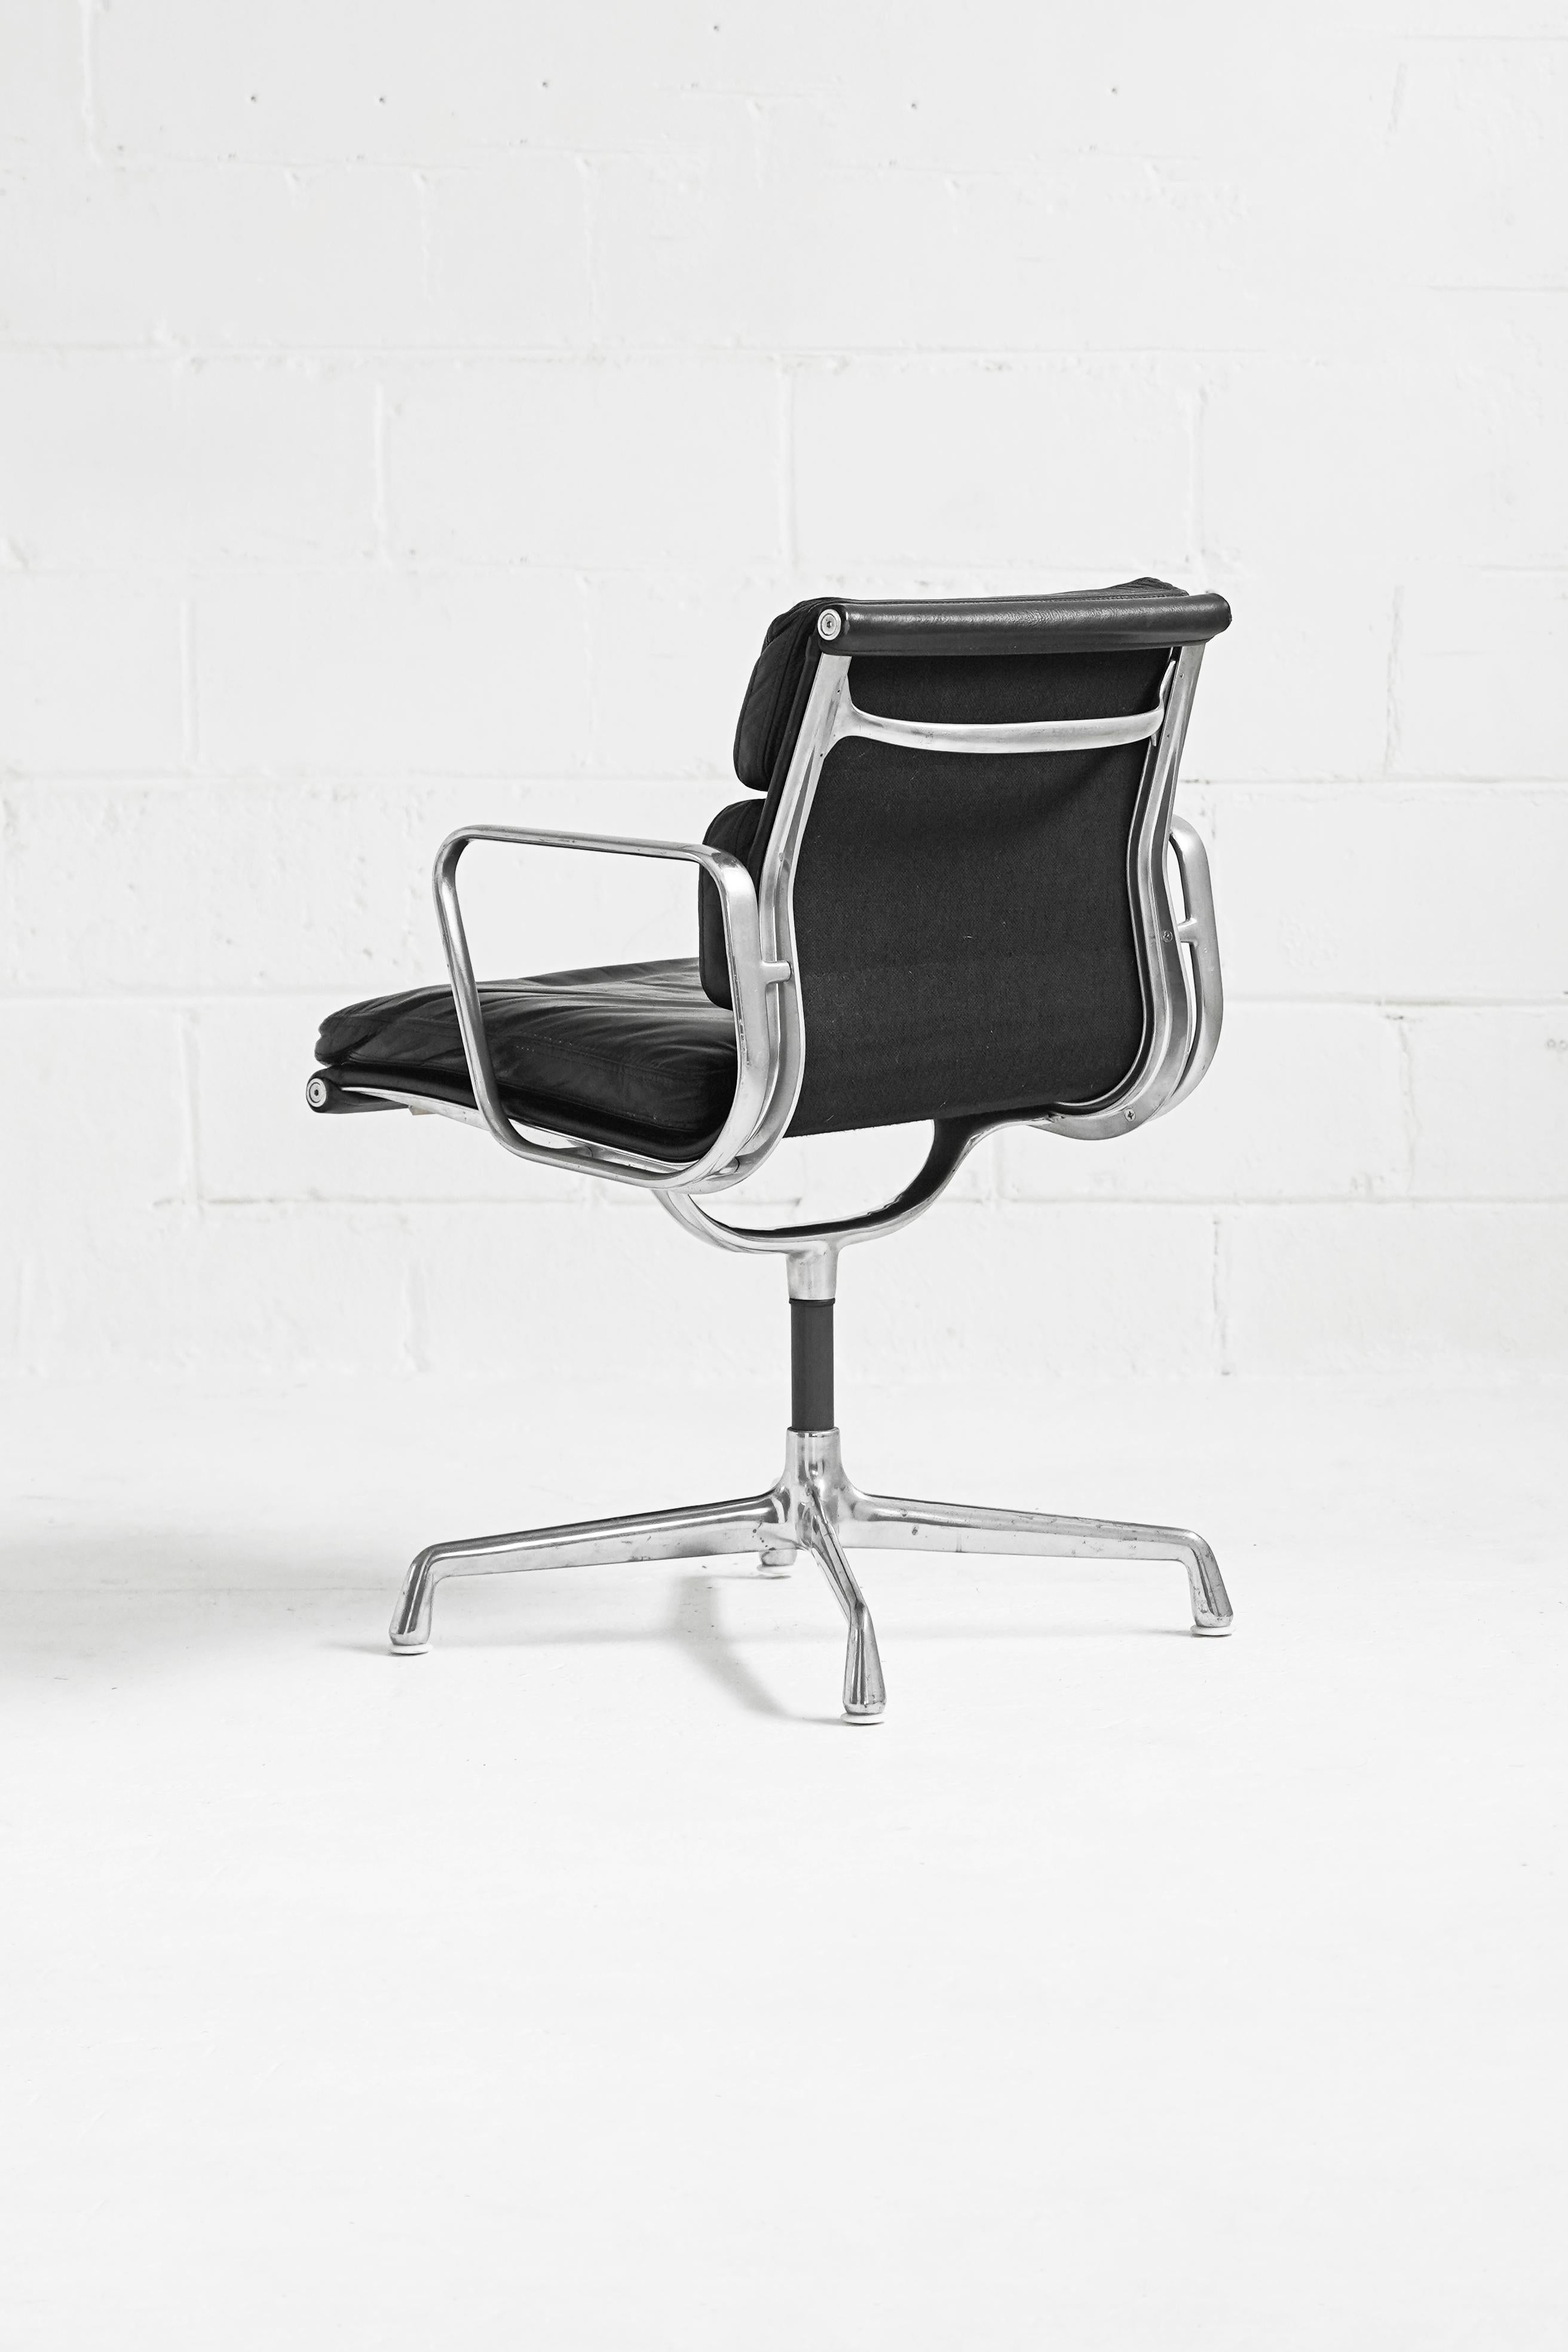 Eames soft pad management chair for Herman Miller. In great vintage condition, manufactured within 1960-1978. A great piece with amazing original black leather.